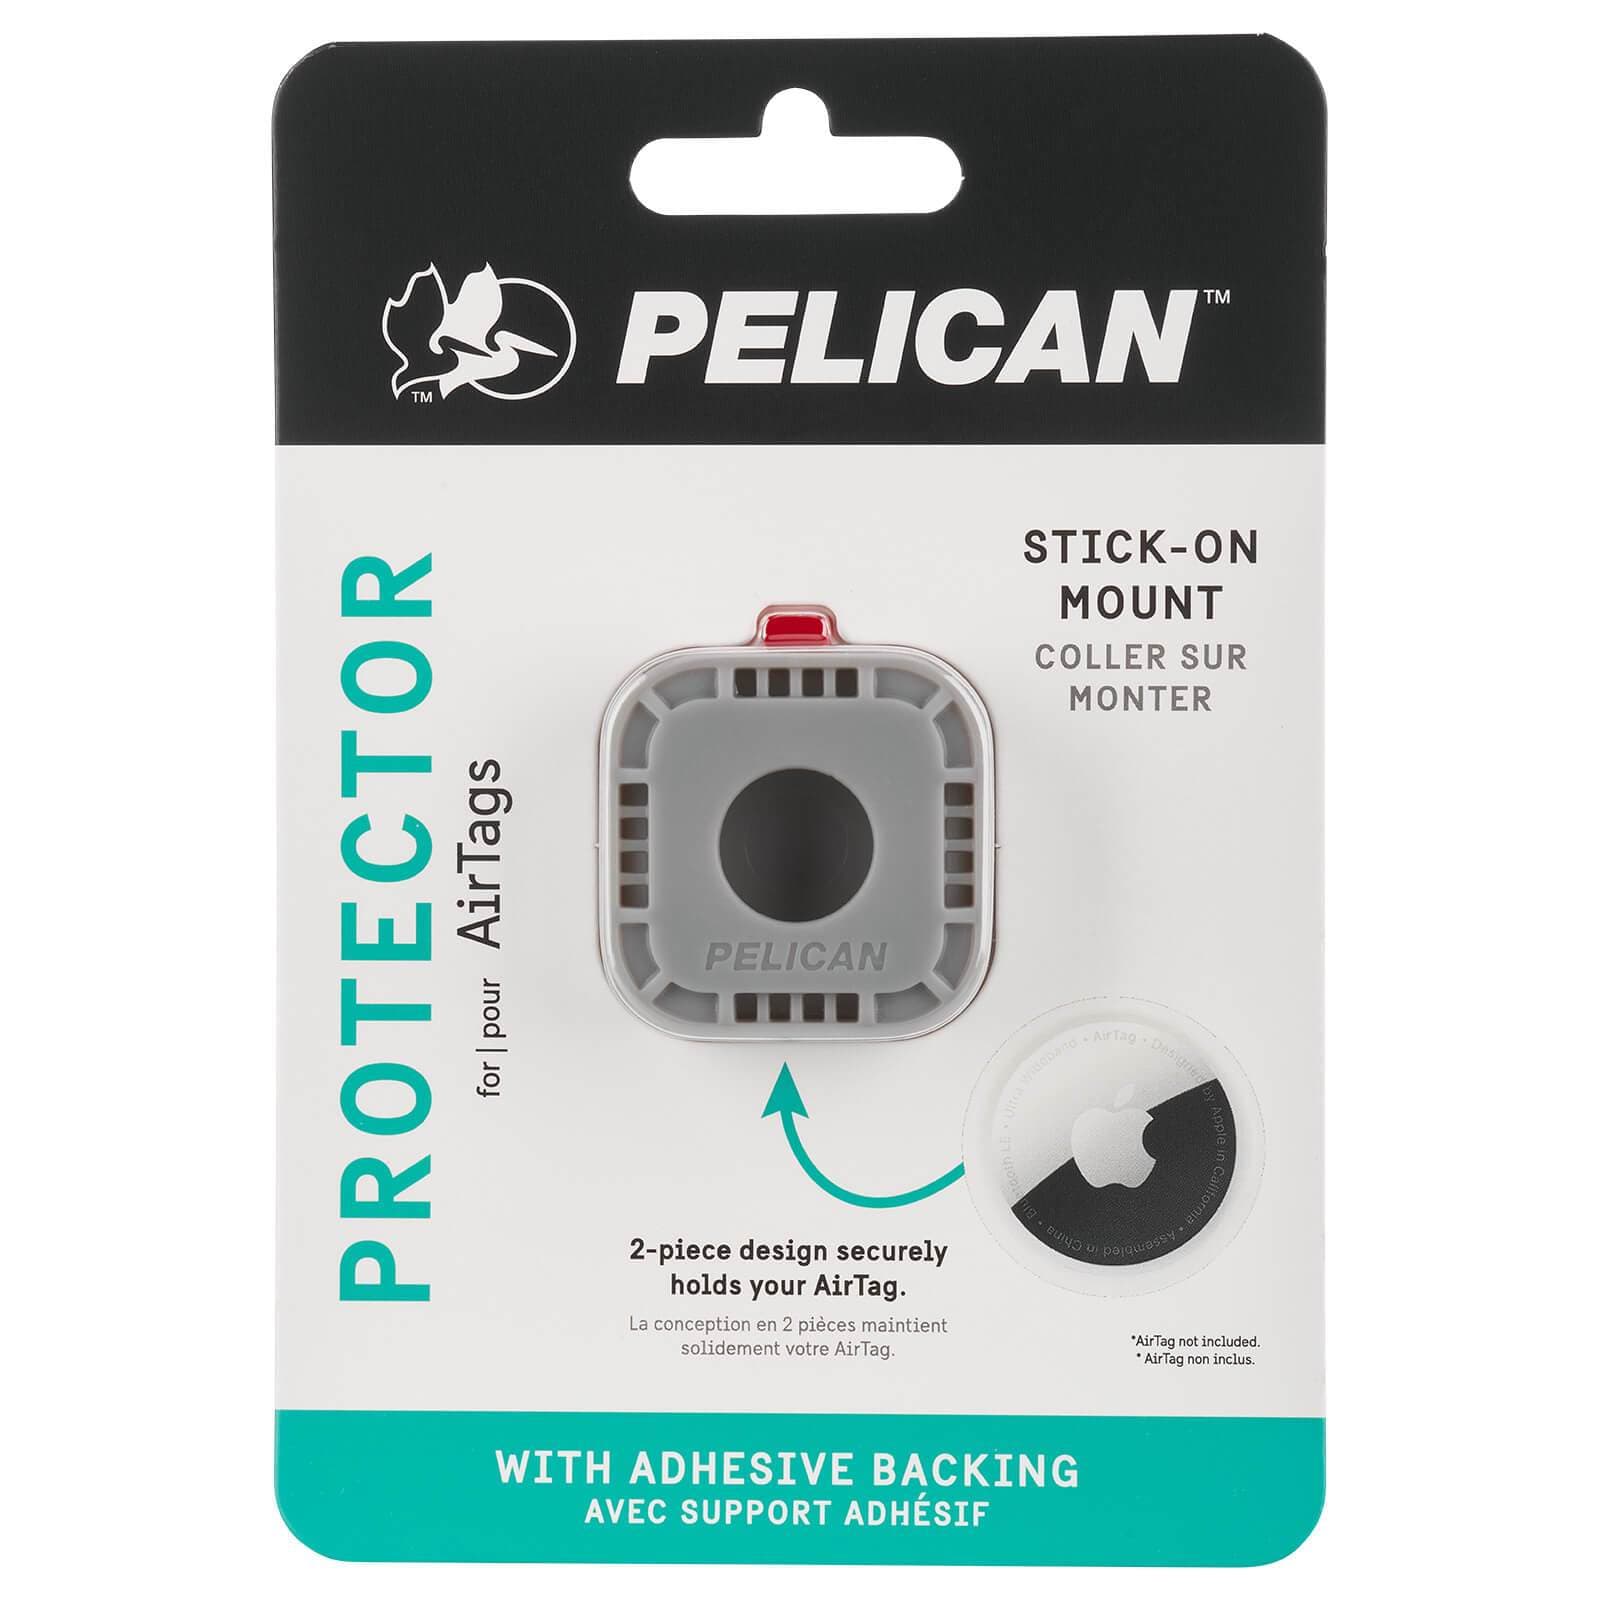 Pelican Protector for AirTags. Stick-on mount. 2-piece design securely holds your AirTag with Adhesive Backing. color::Gray